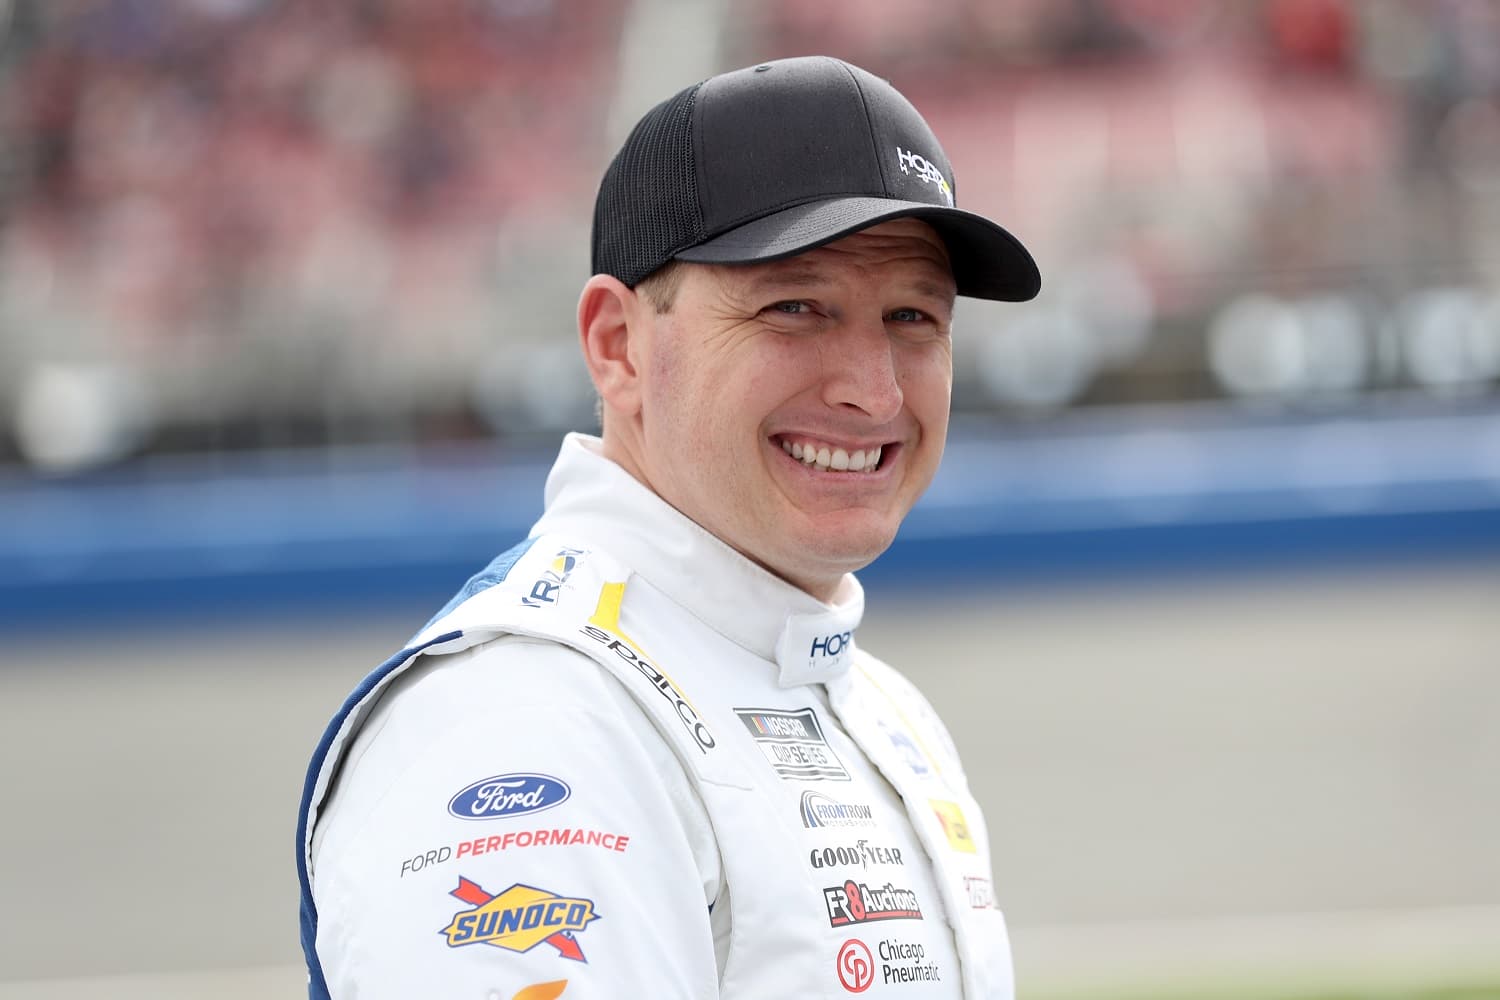 Michael McDowell waits on the grid prior to the NASCAR Cup Series Pala Casino 400 at Auto Club Speedway on Feb. 26, 2023.